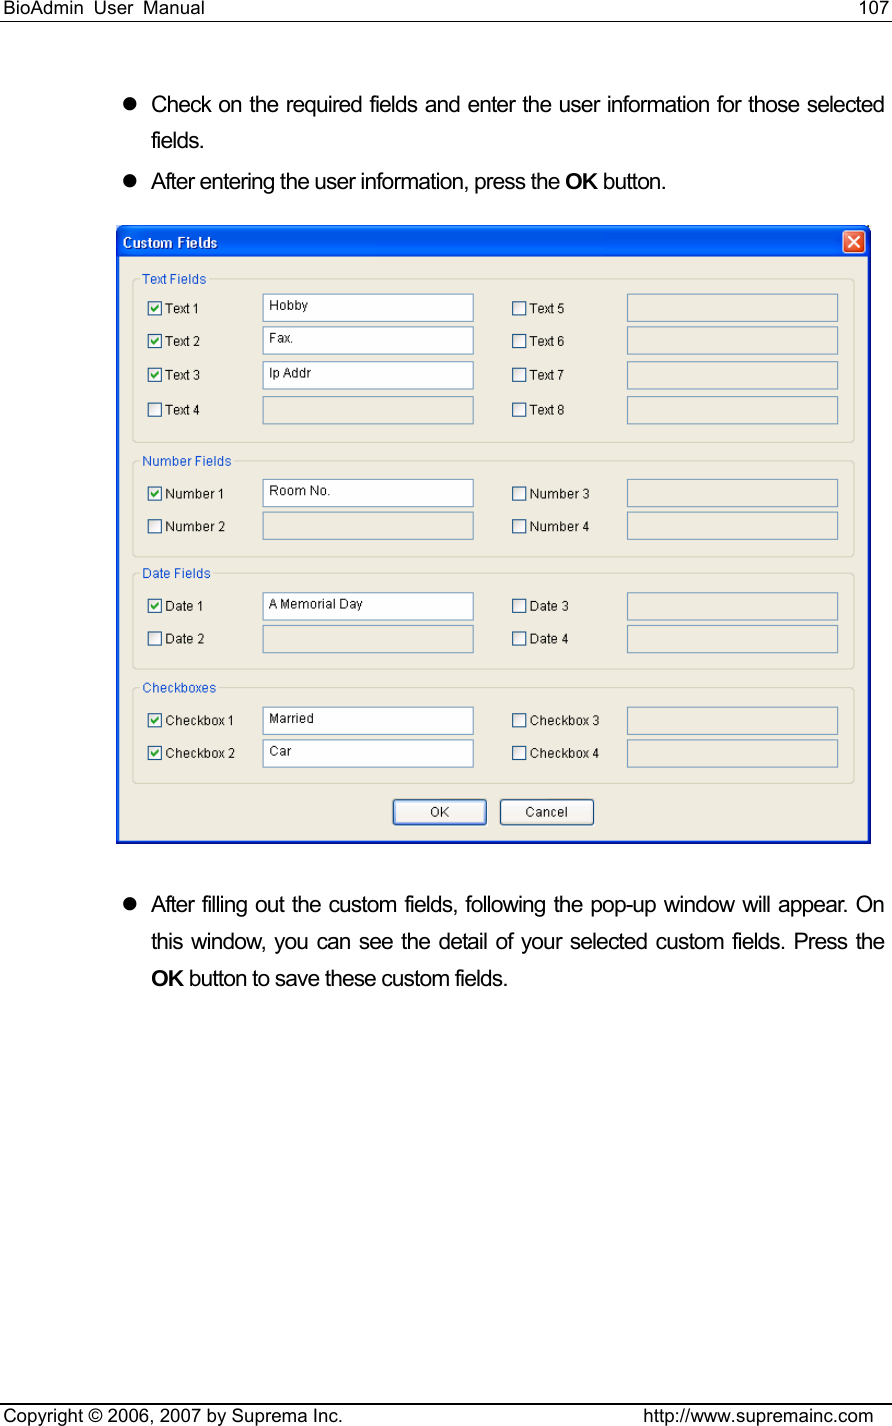 BioAdmin User Manual                                                                     107   Copyright © 2006, 2007 by Suprema Inc.                                http://www.supremainc.com z  Check on the required fields and enter the user information for those selected fields.  z  After entering the user information, press the OK button.   z  After filling out the custom fields, following the pop-up window will appear. On this window, you can see the detail of your selected custom fields. Press the OK button to save these custom fields. 